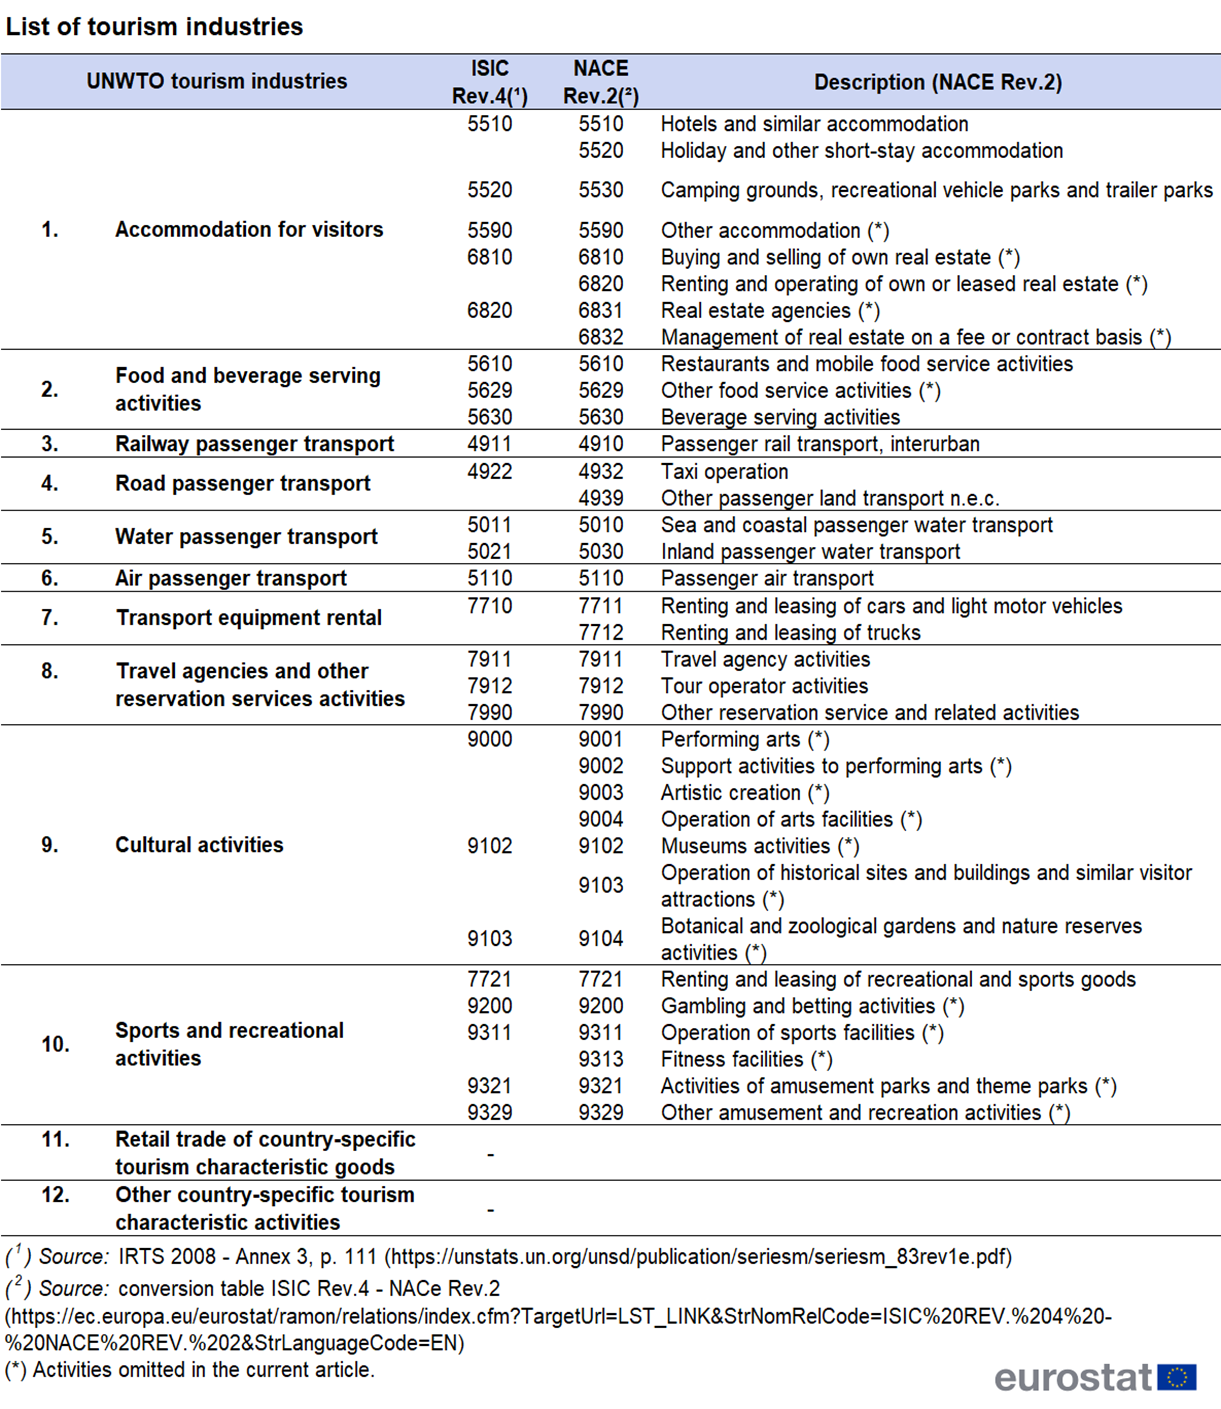 Table showing list of tourism industries, their NACE rev. 2 codes and descriptions.